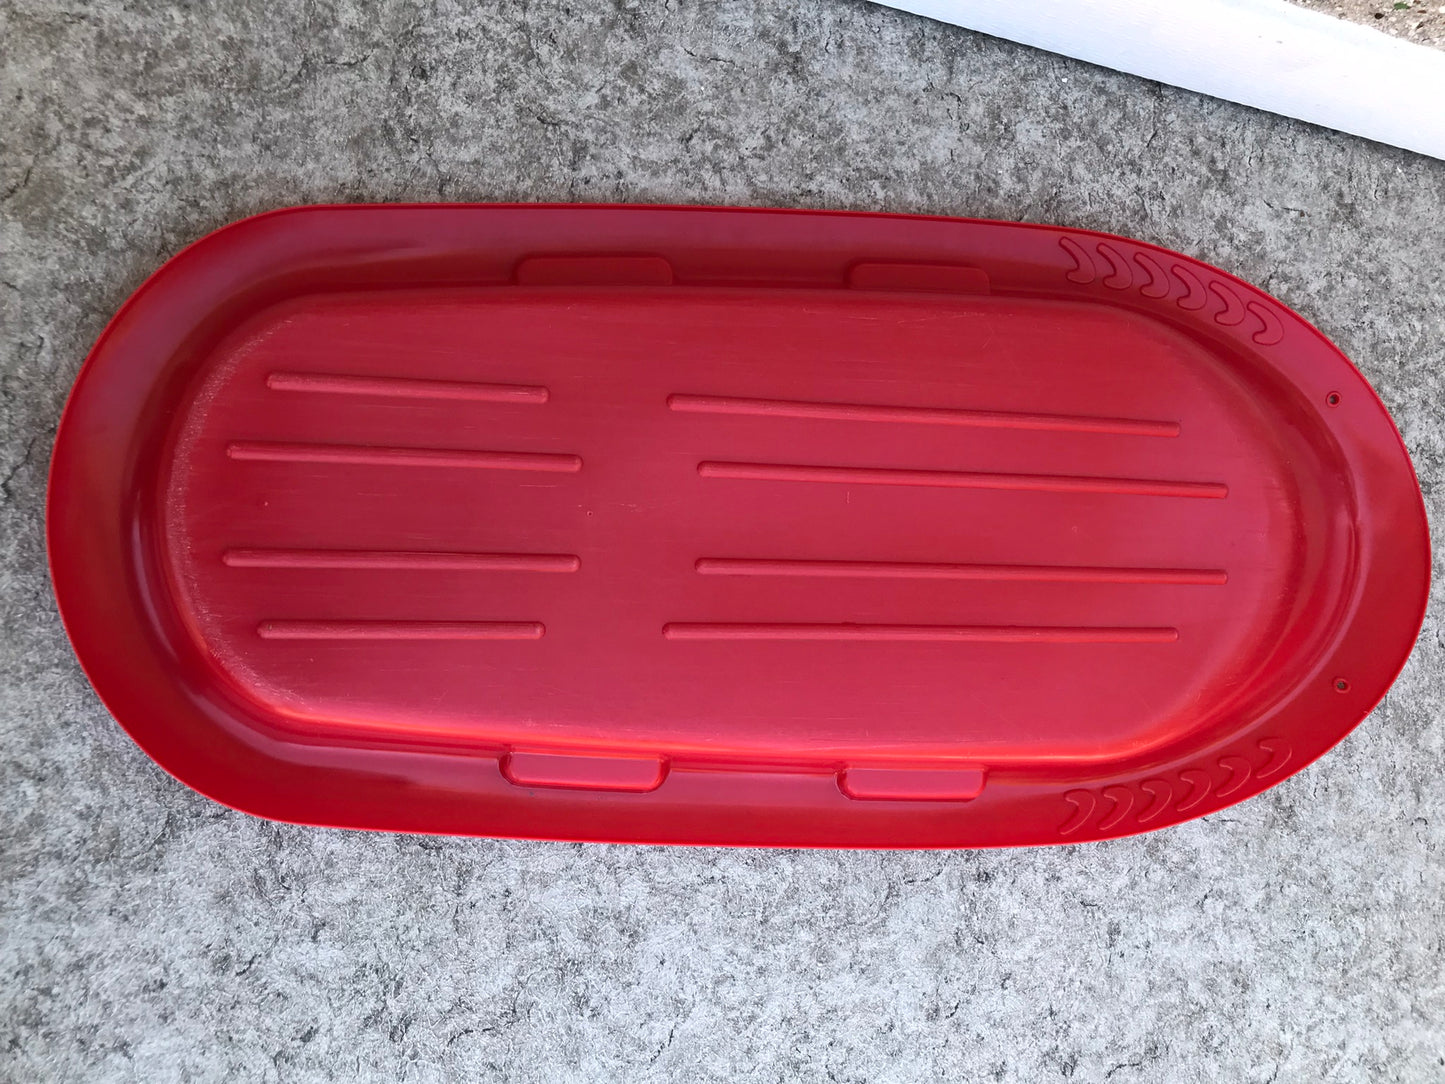 Snow Sled Taboggan 1-2 Child Apple Red As New PICK UP ONLY